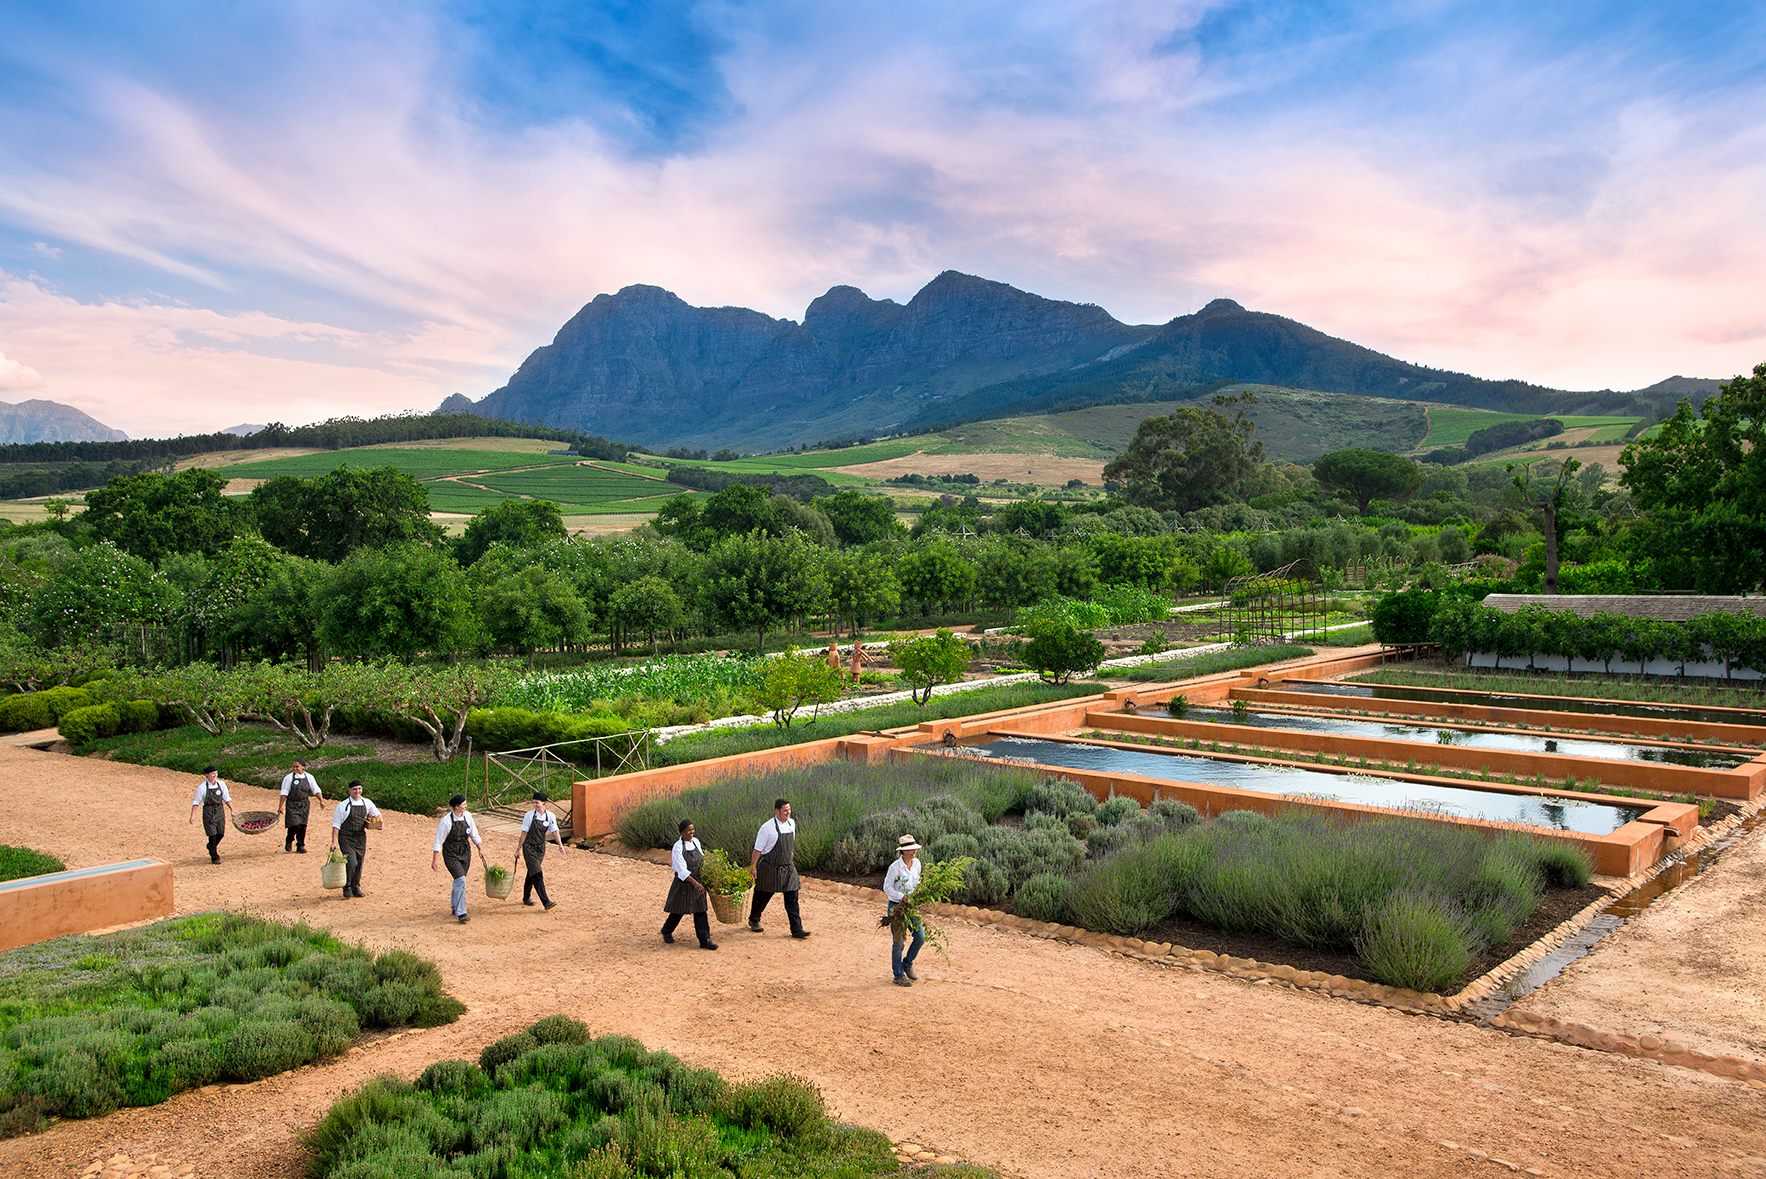 Where To Eat and What To Do in The Winelands